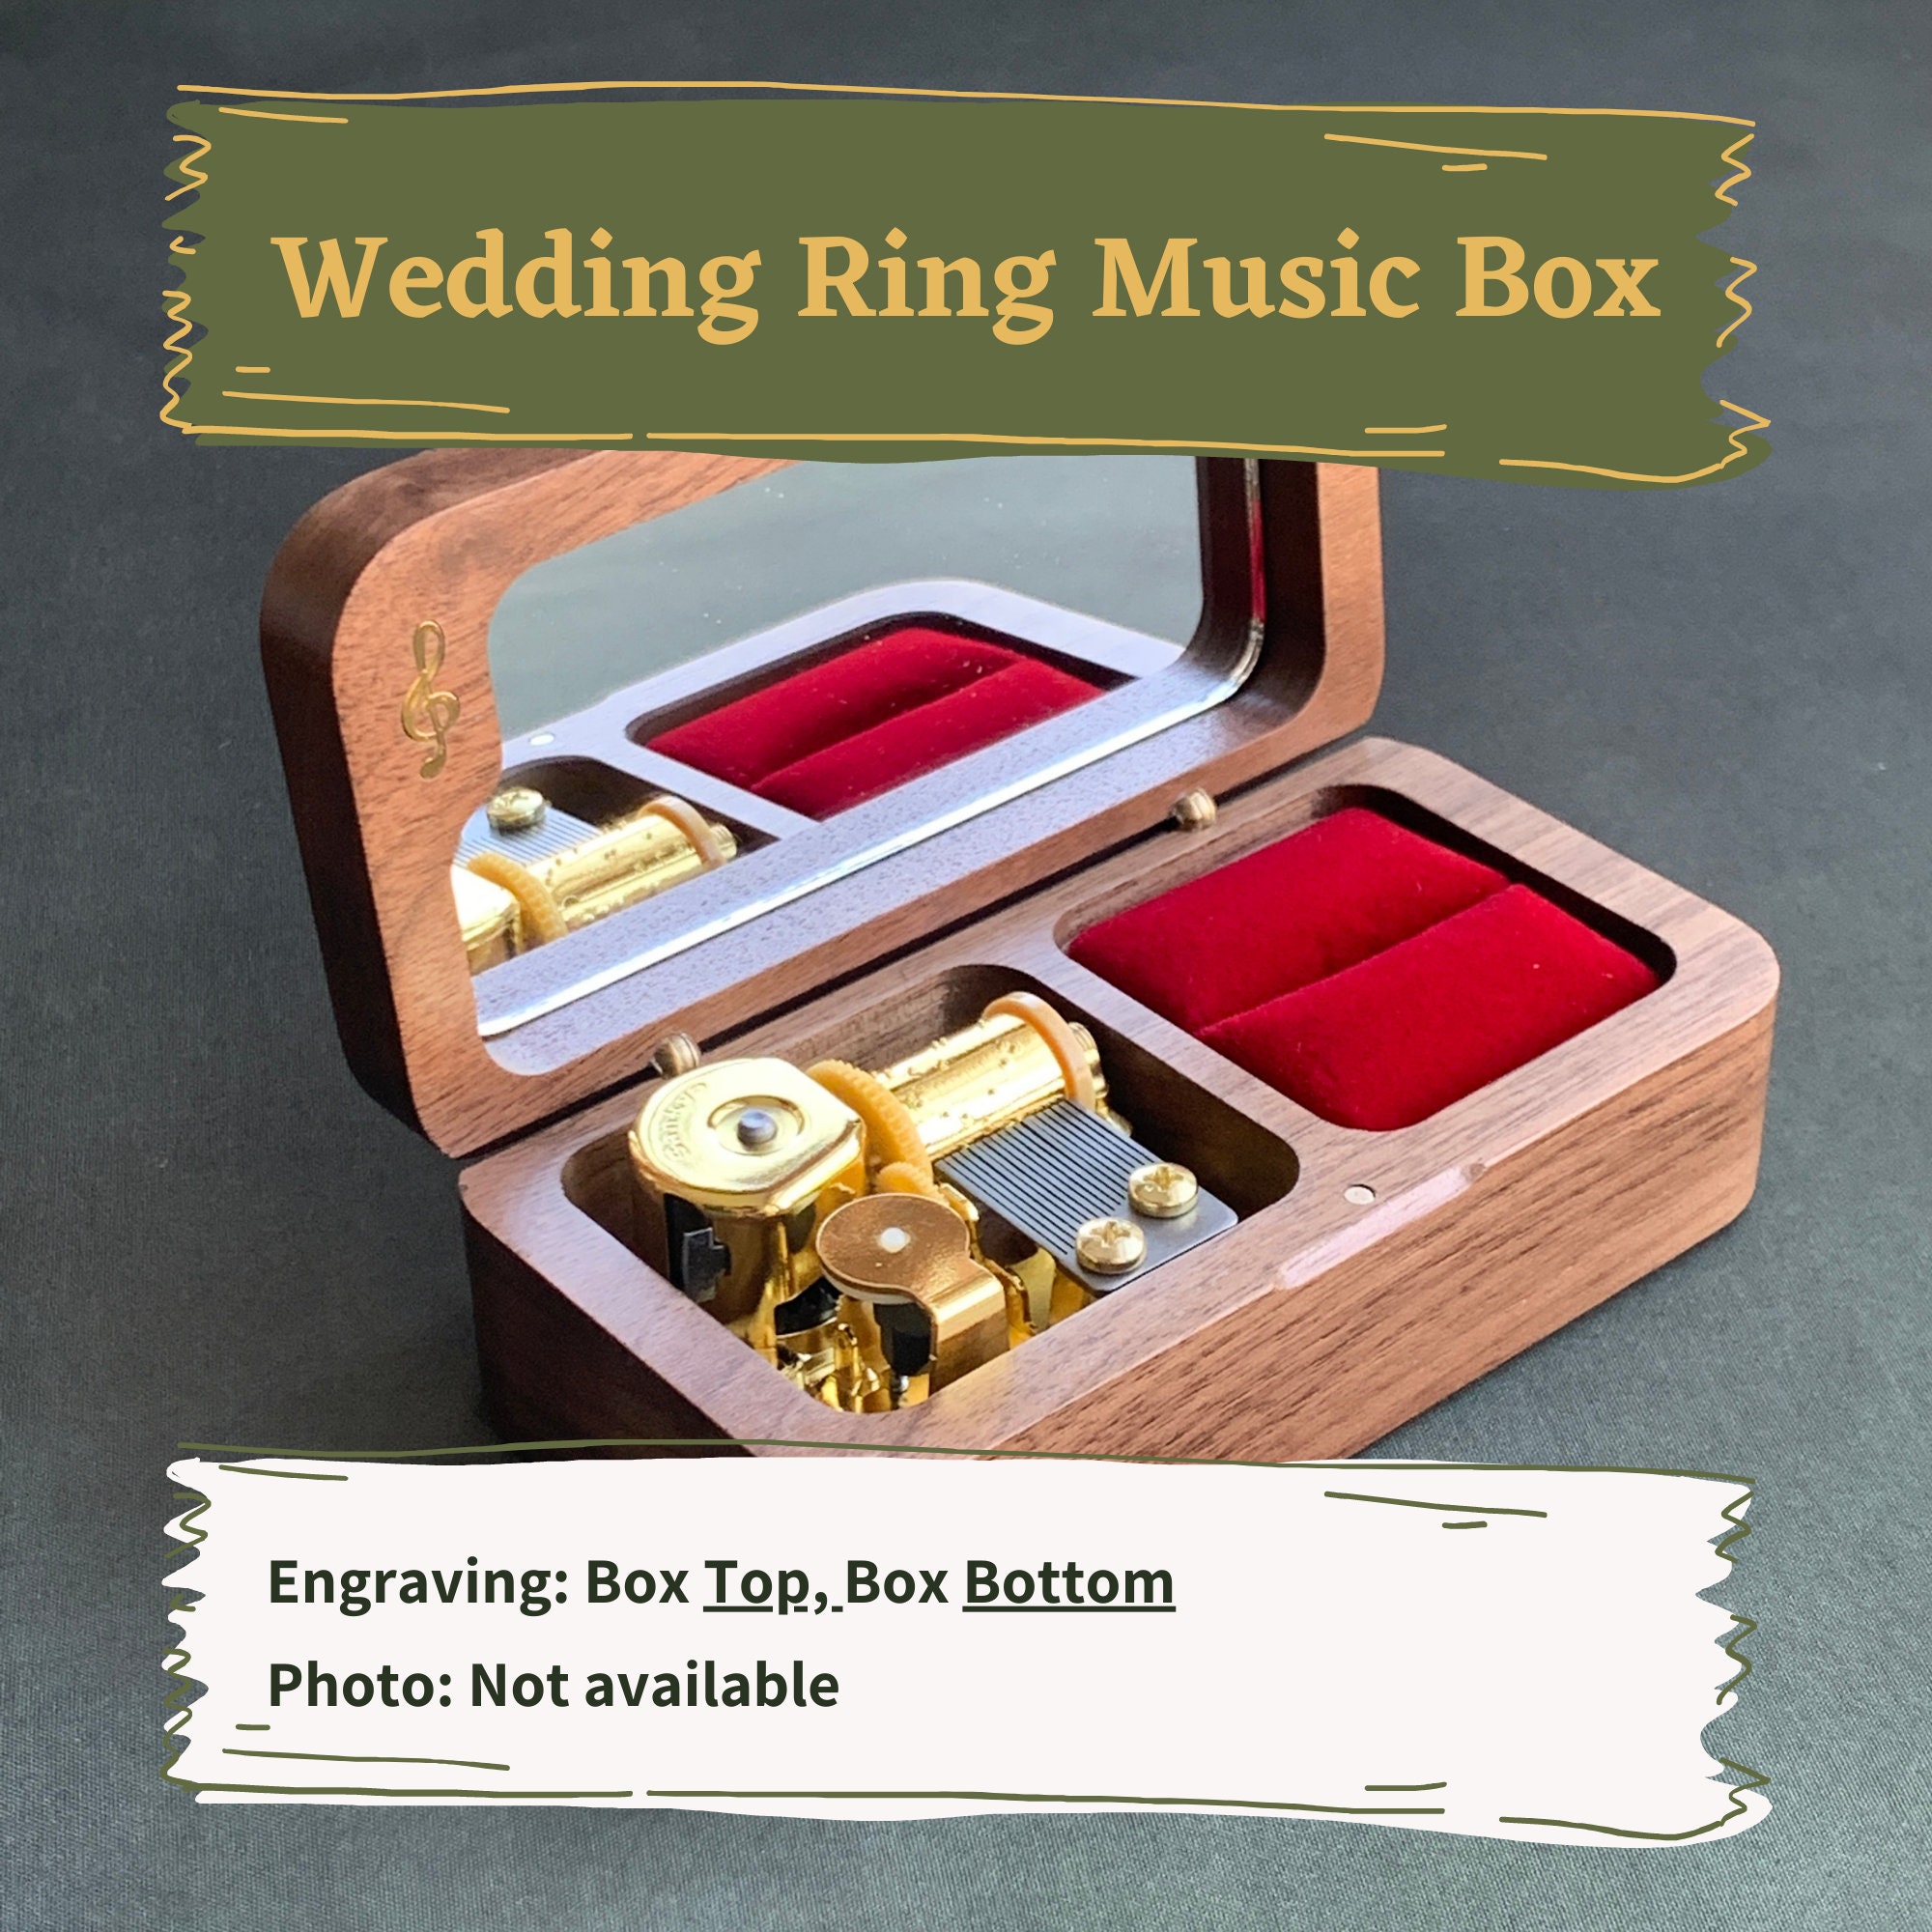 Buy Engagement Music Box Online In India - Etsy India